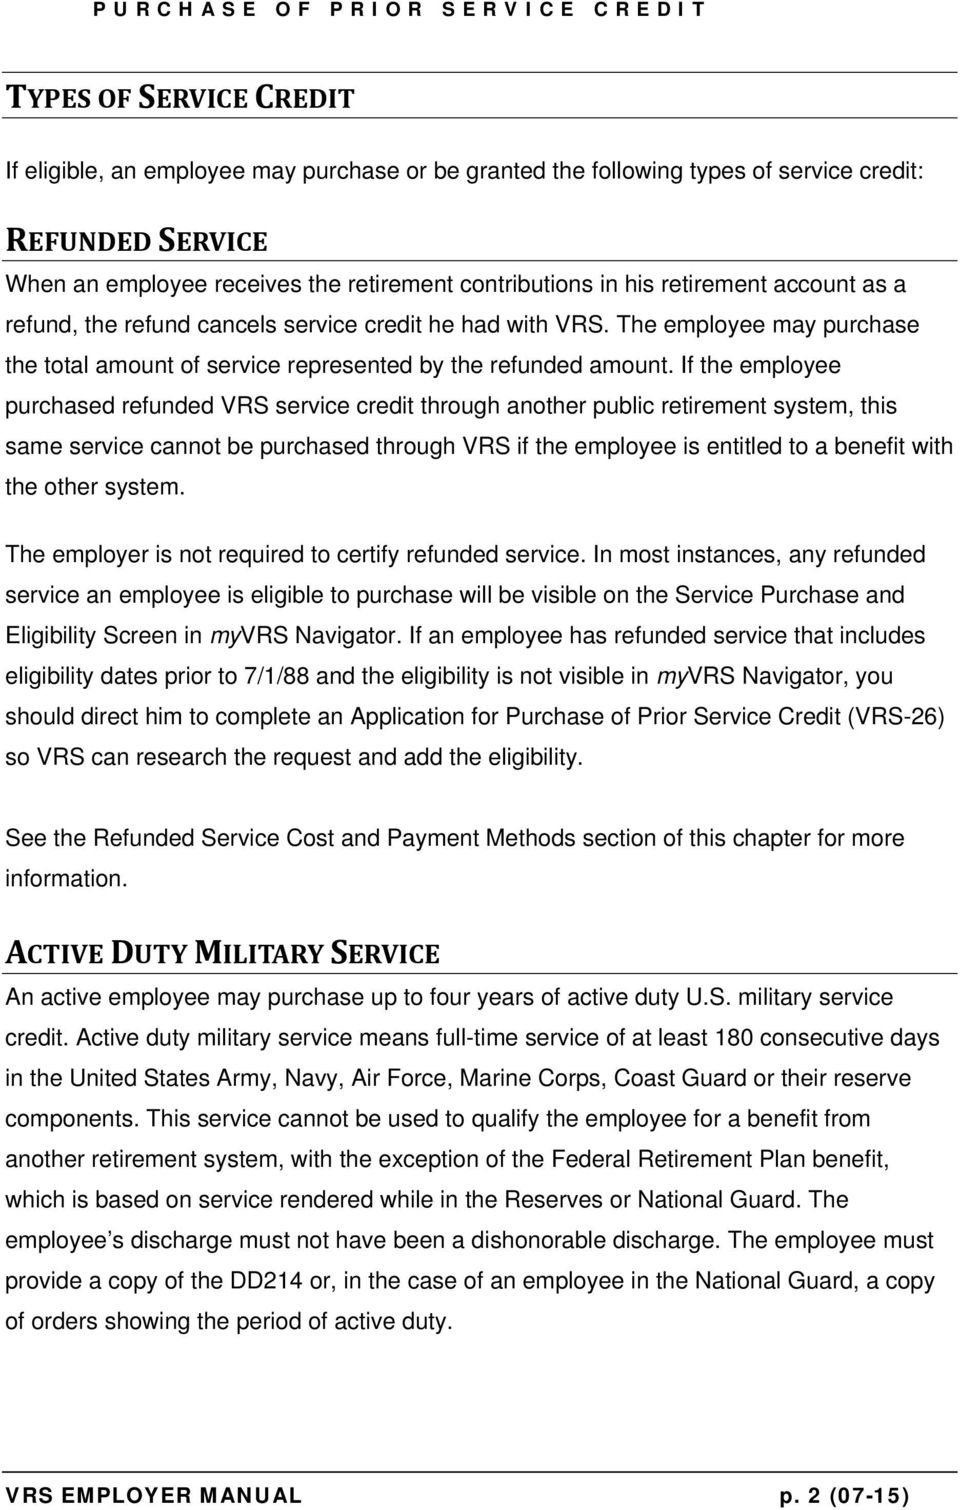 If the employee purchased refunded VRS service credit through another public retirement system, this same service cannot be purchased through VRS if the employee is entitled to a benefit with the